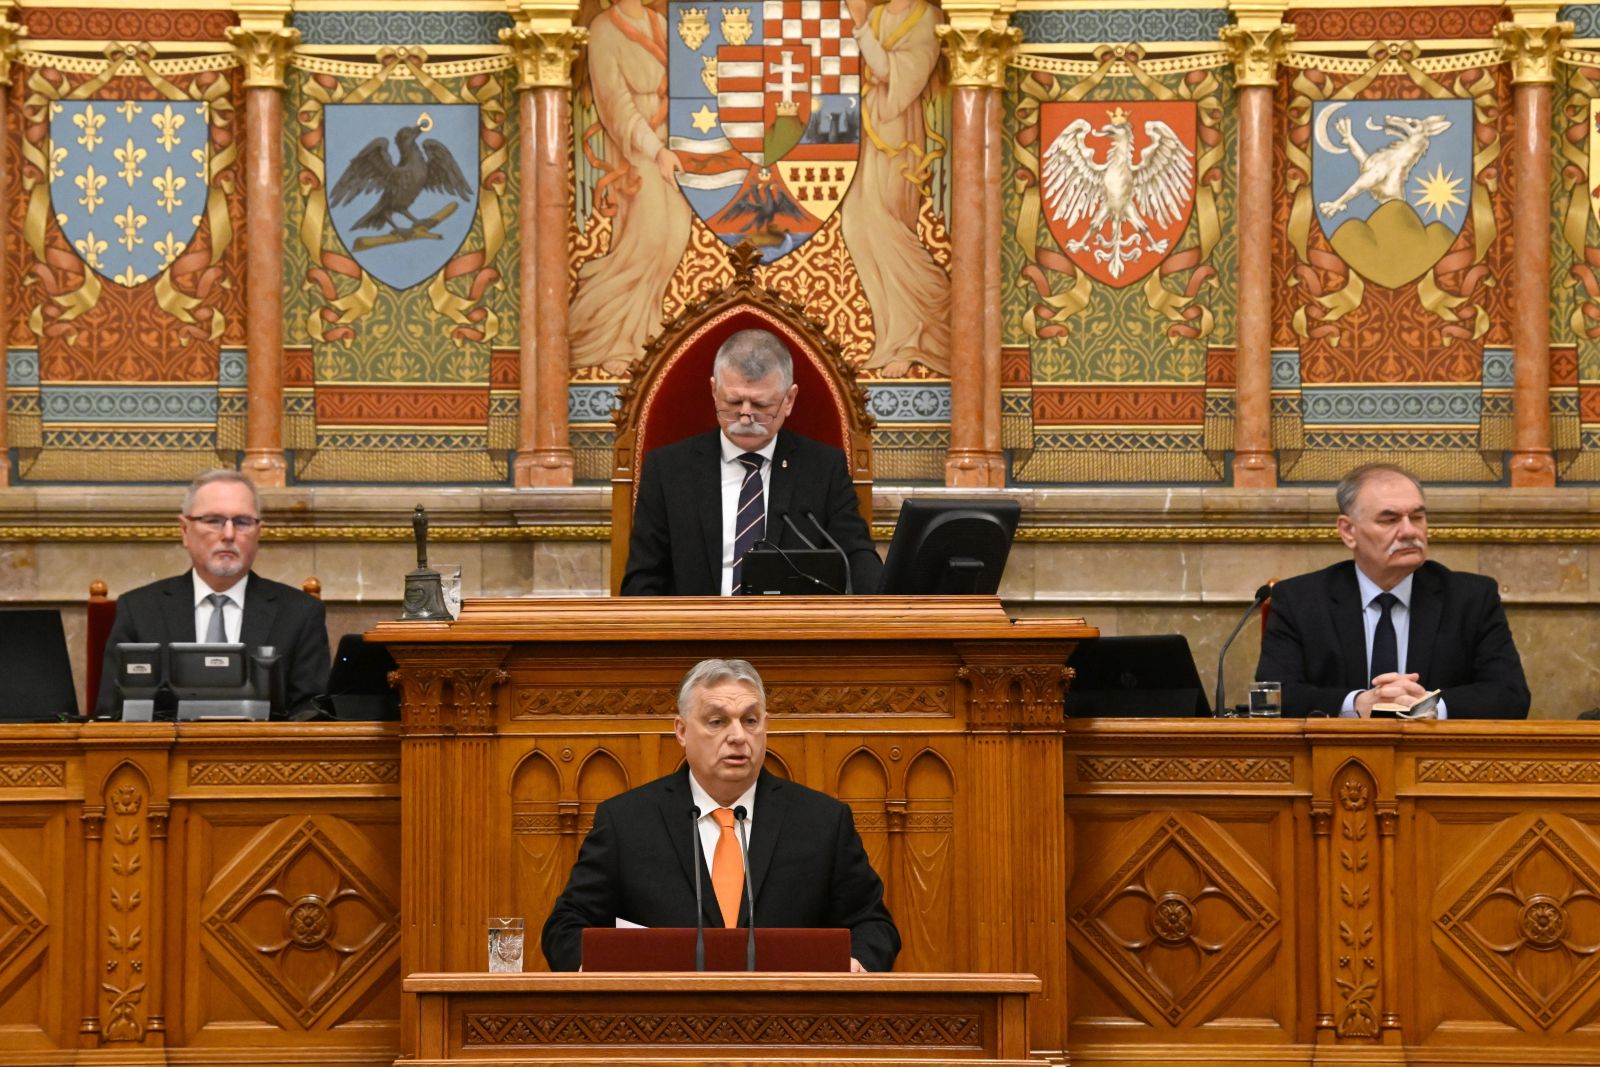 epa11182603 Hungarian Prime Minister Viktor Orban (C, front) delivers his address on the opening day of the spring session of the Hungarian Parliament in Budapest, Hungary, 26 February 2024. In picture is seen Speaker of the Parliament Laszlo Kover (C, back). Hungarian lawmakers are expected to vote about the new head of state on the day. The ruling coalition Fidesz-KDNP nominated Tamas Sulyok, the current head of the Constitutional Court for head of state.  EPA/SZILARD KOSZTICSAK HUNGARY OUT